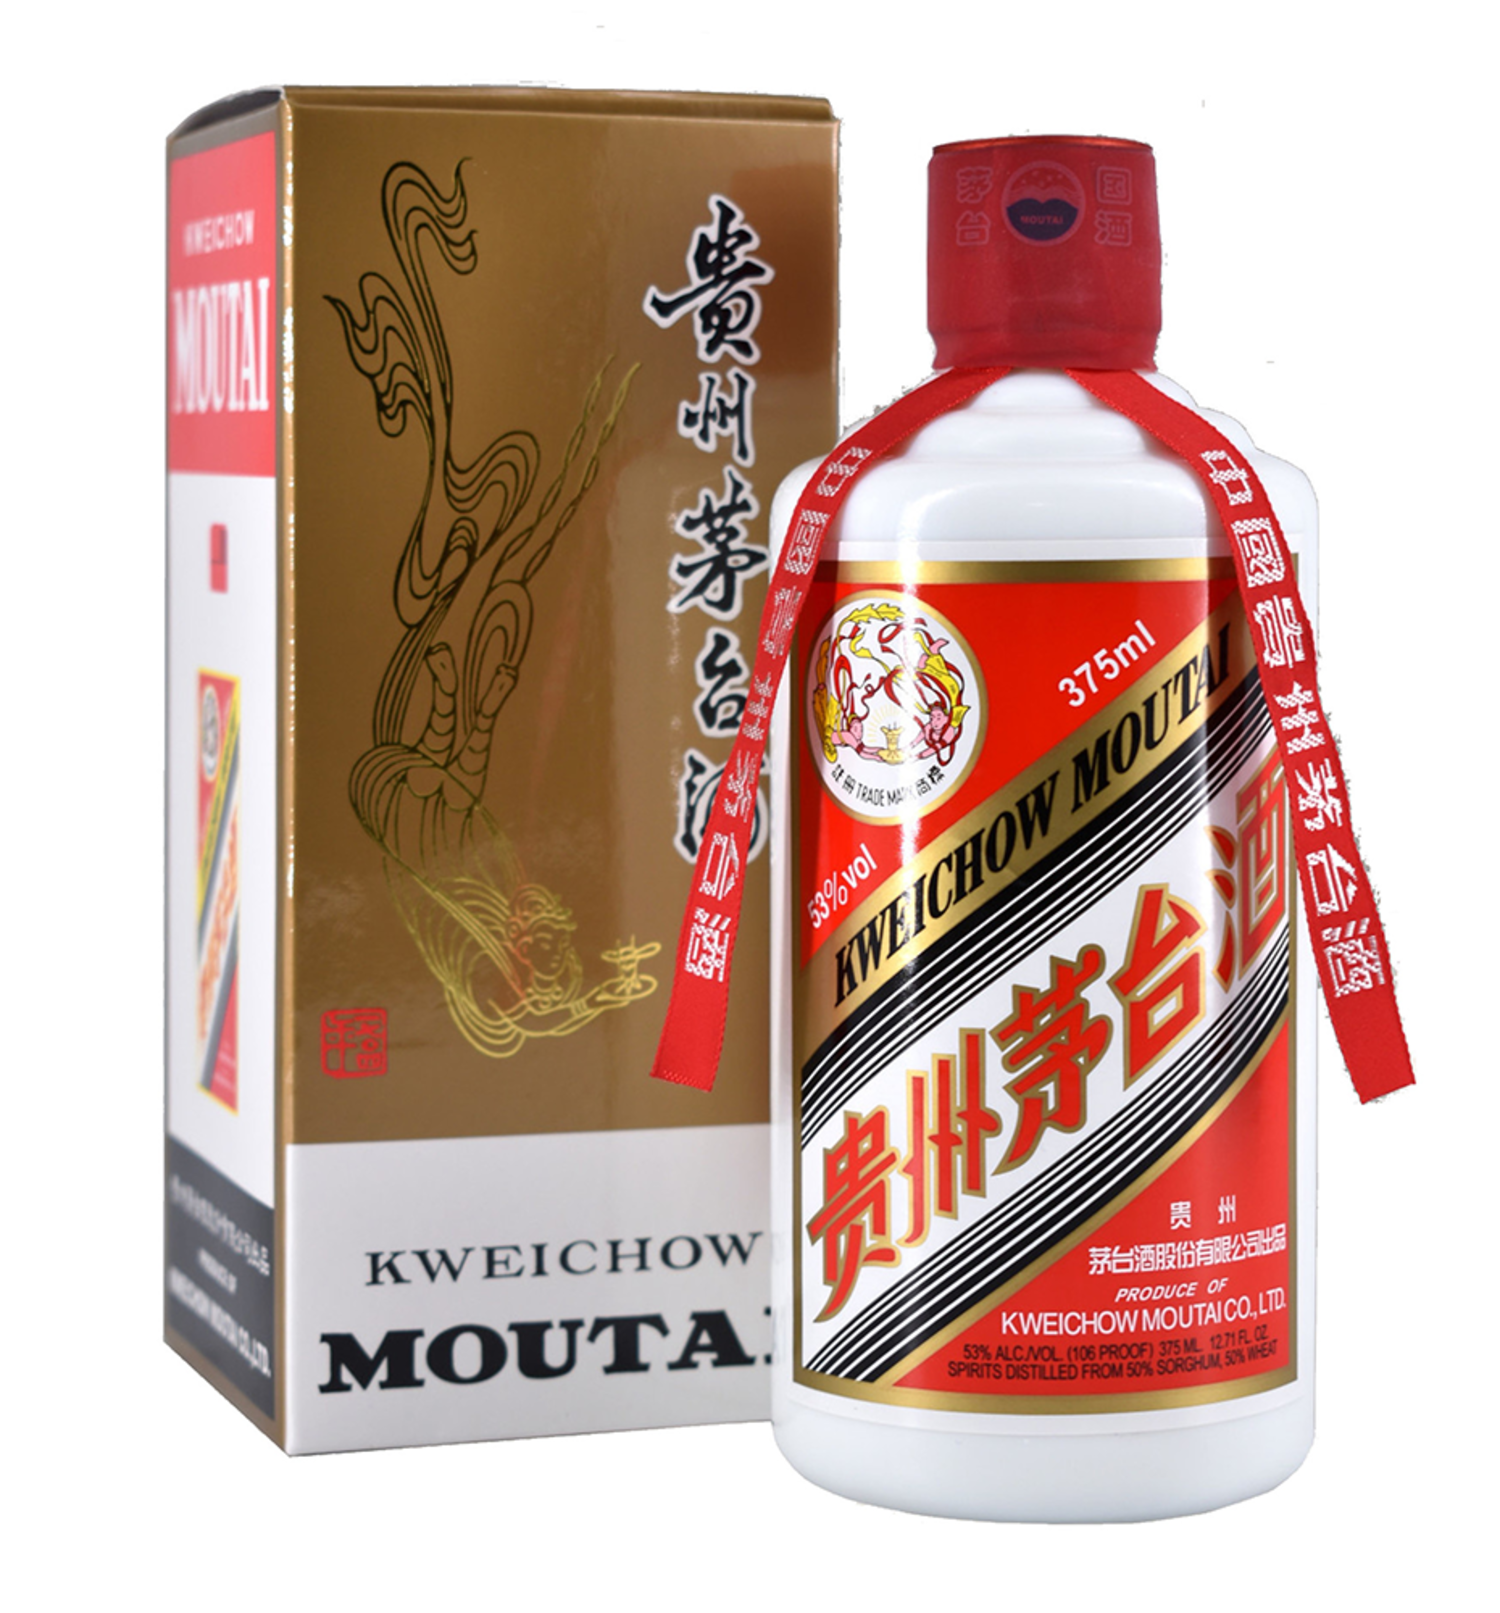 Moutai 贵州茅台2012 375ml $955 FREE DELIVERY - Uncle Fossil 